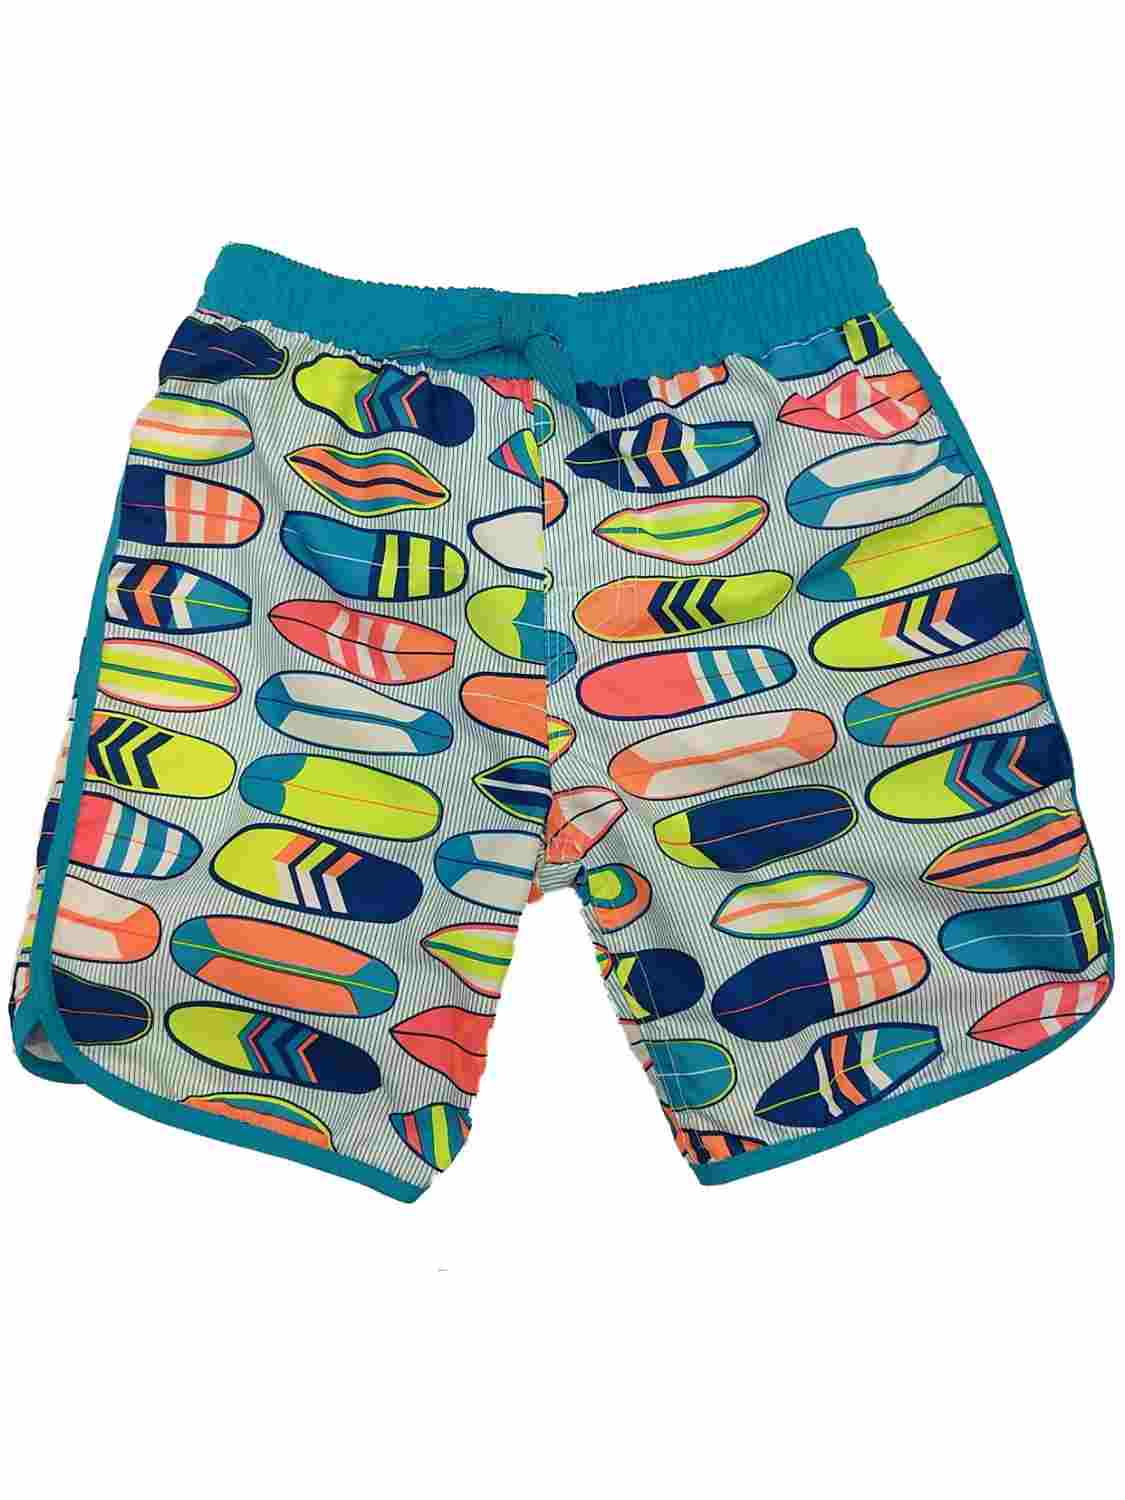 Children So-Nic The Hedg-Ehog 3D Print Shorts Surfing Casual Board Shorts Swim Trunk Quick Dry for Boys/Girls/Youth 